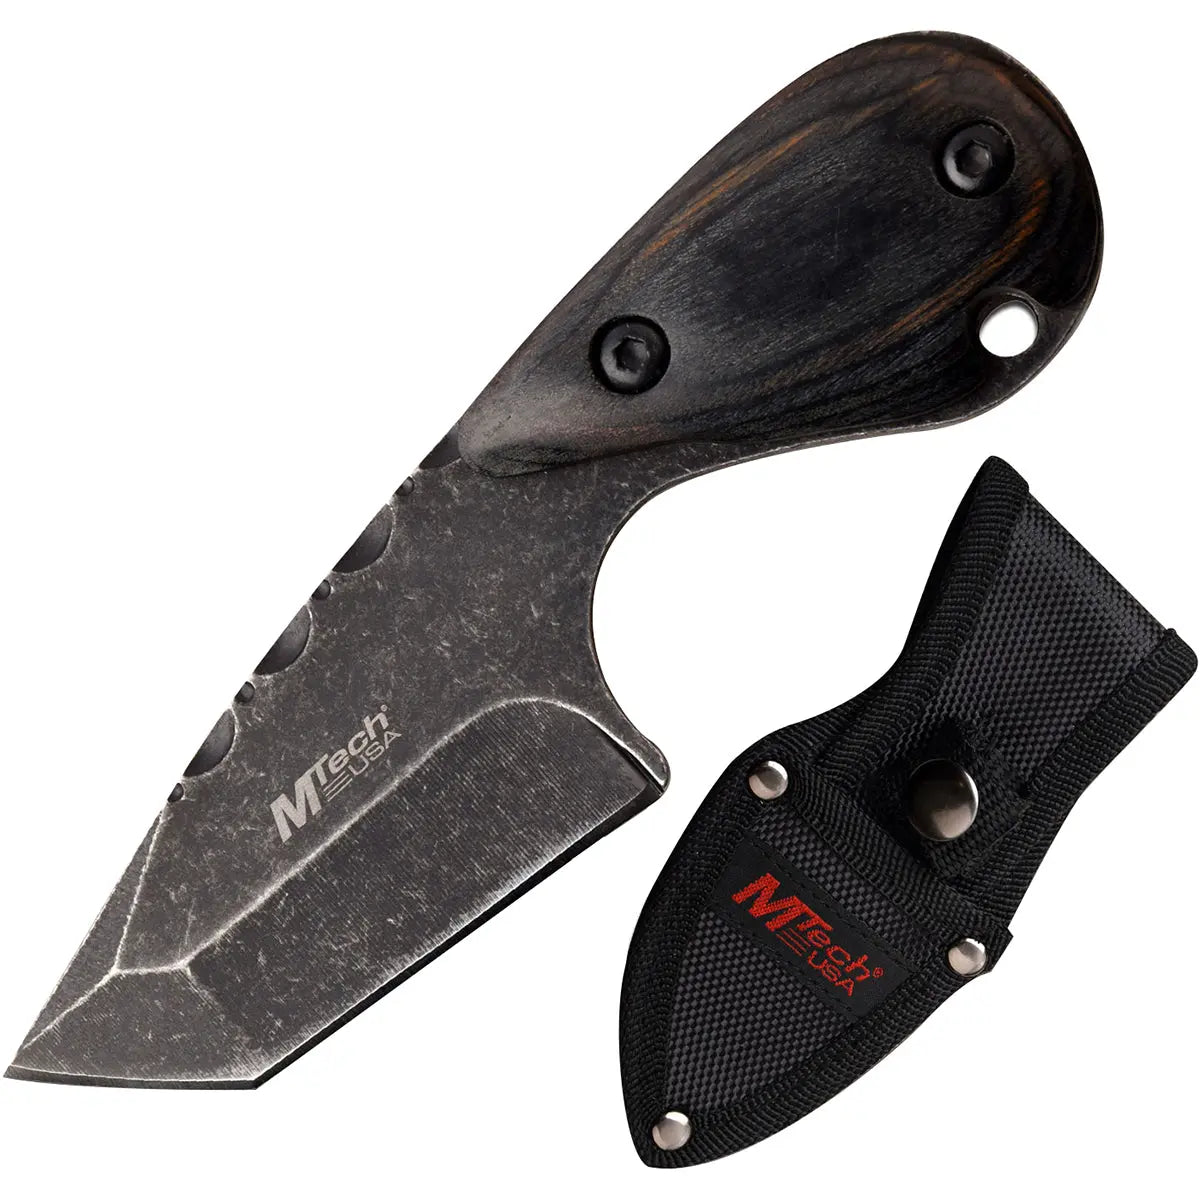 MTech USA Full Tang Tanto Fixed Blade Hunting Knife, 5" Overall, MT-20-90BK M-Tech